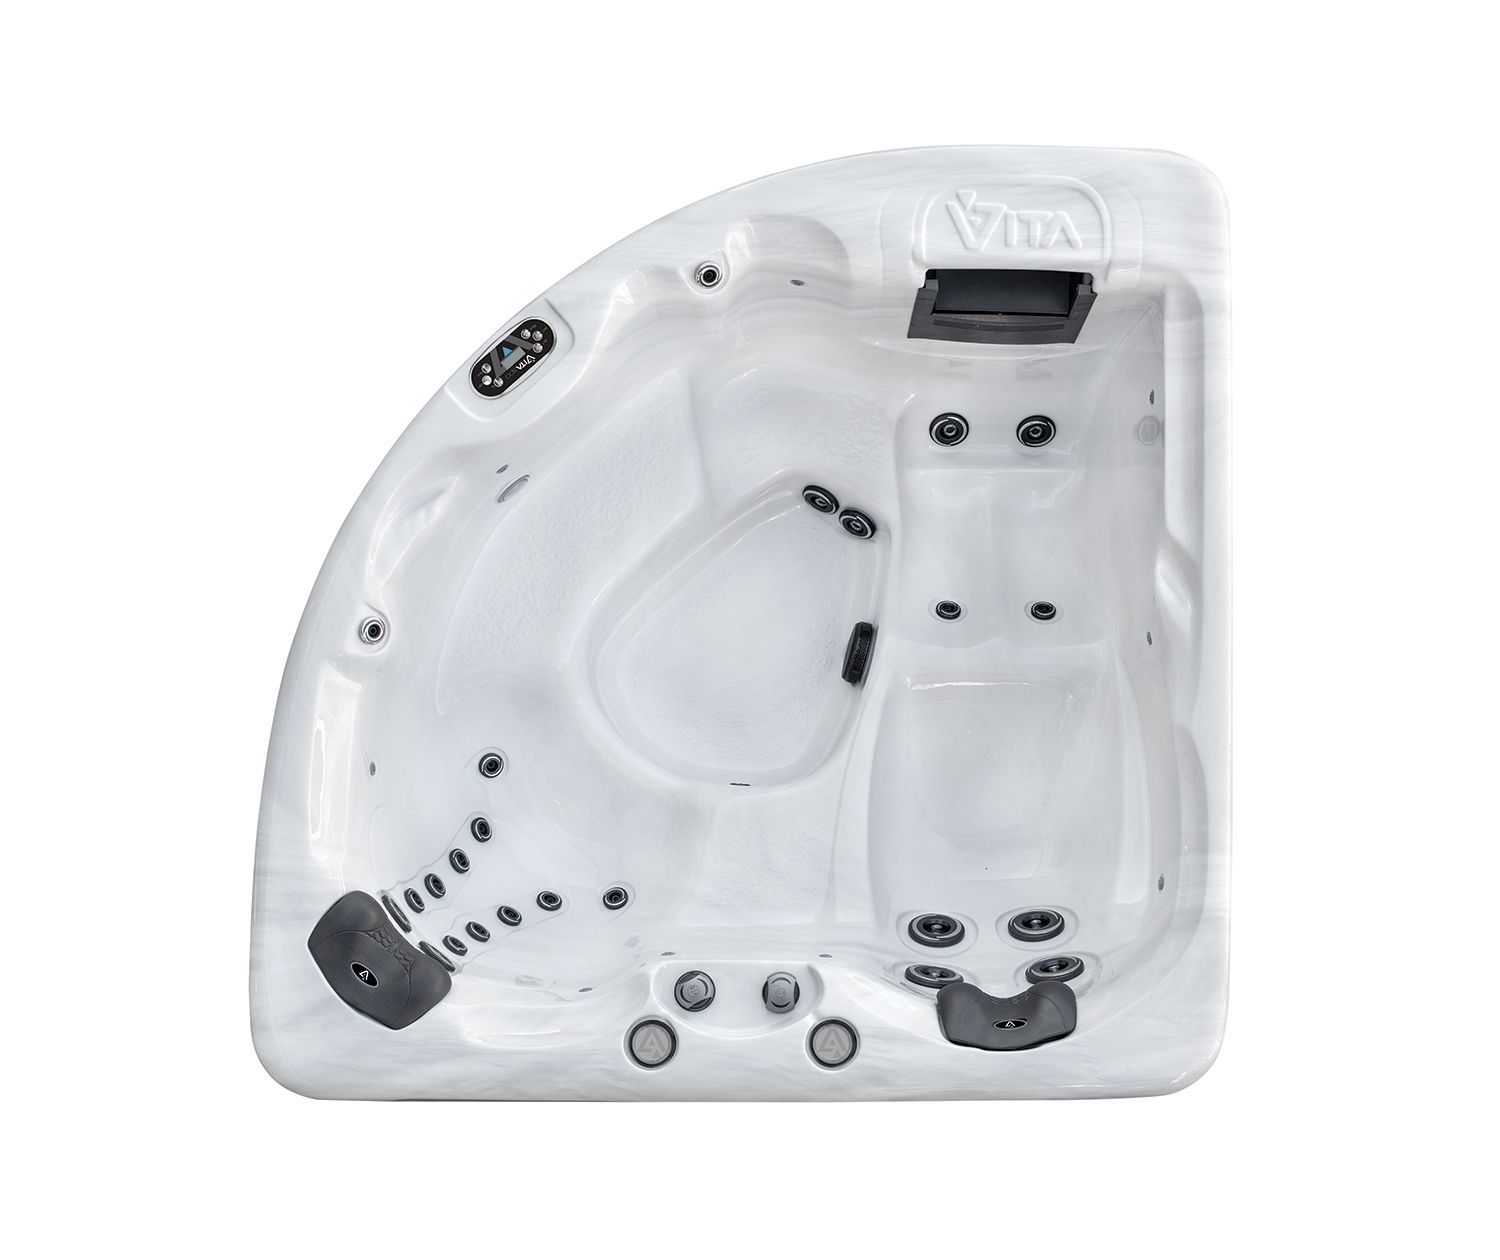 Amour: Small Couple 2 Person Hot Tub